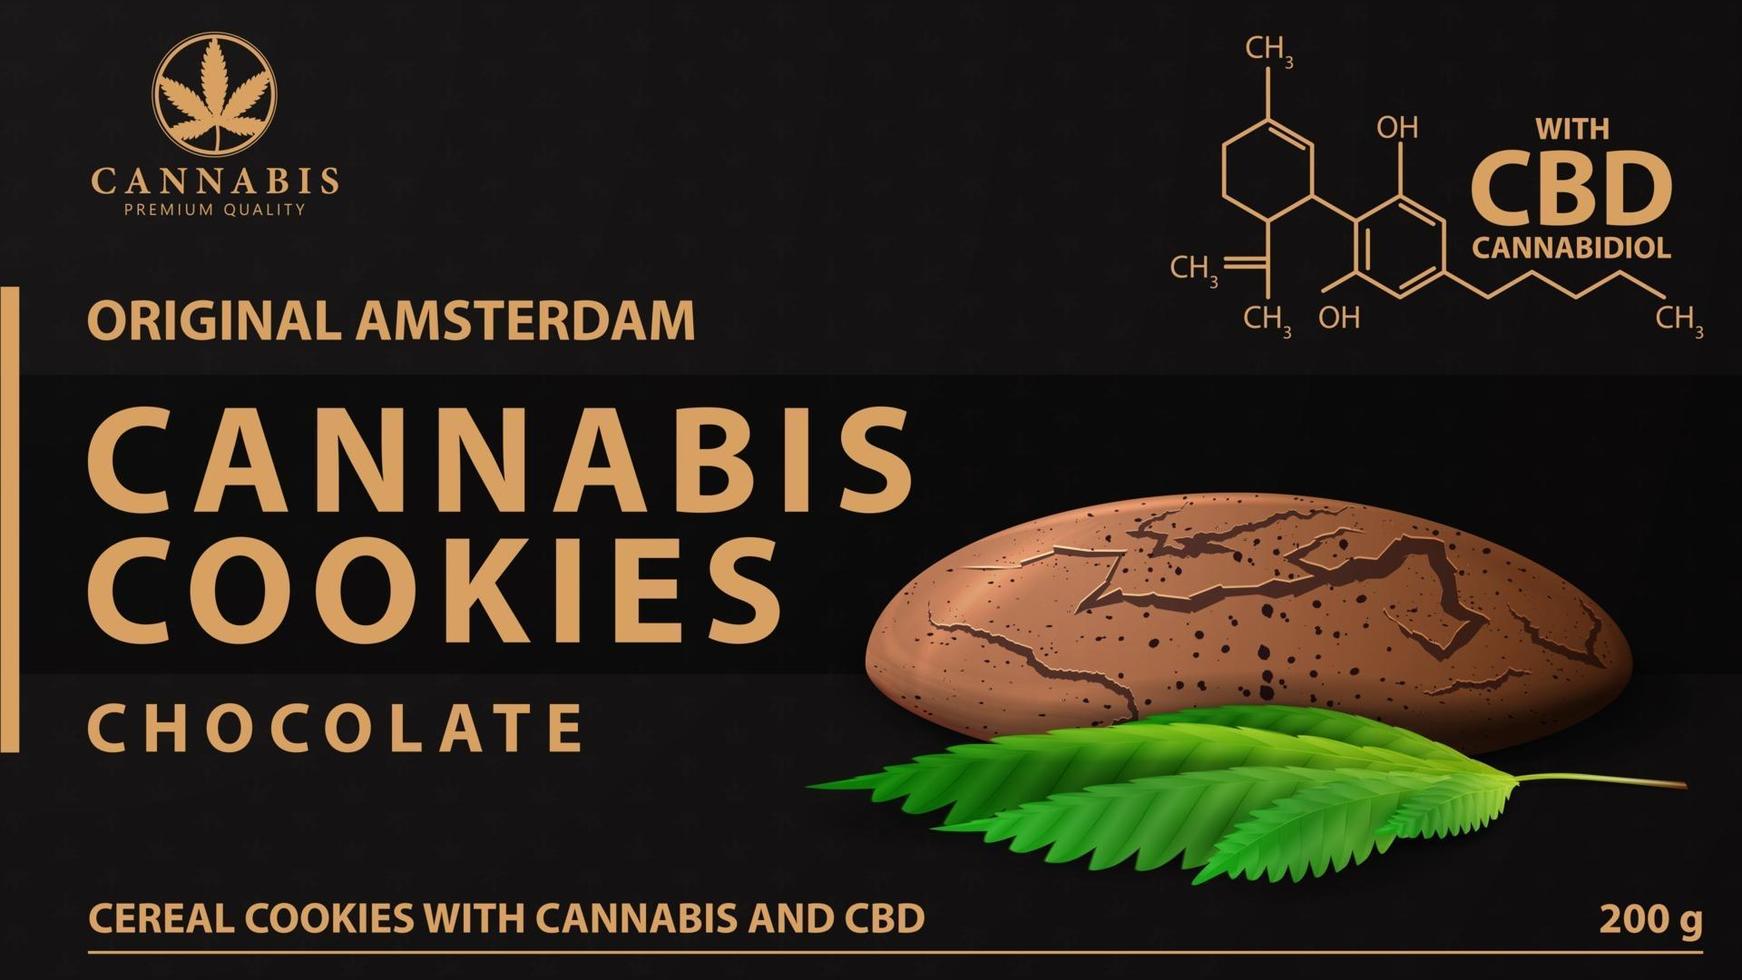 Cannabis cookies, black package with cannabis cookies and marijuana leaf. Black cover design for cannabis products vector